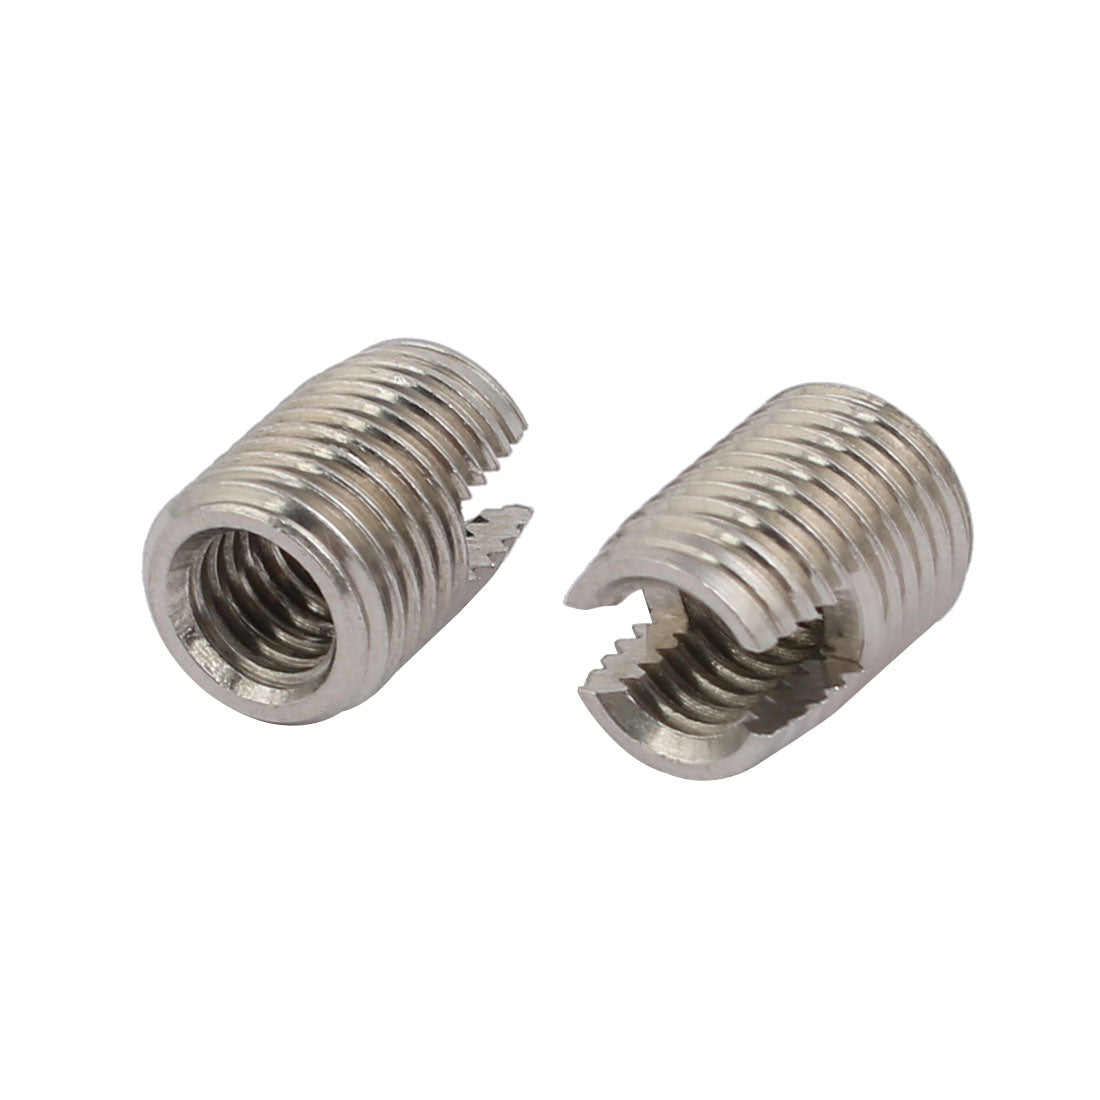 uxcell Uxcell M6x12mm 304 Stainless Steel Self Tapping Slotted Thread Insert 10pcs